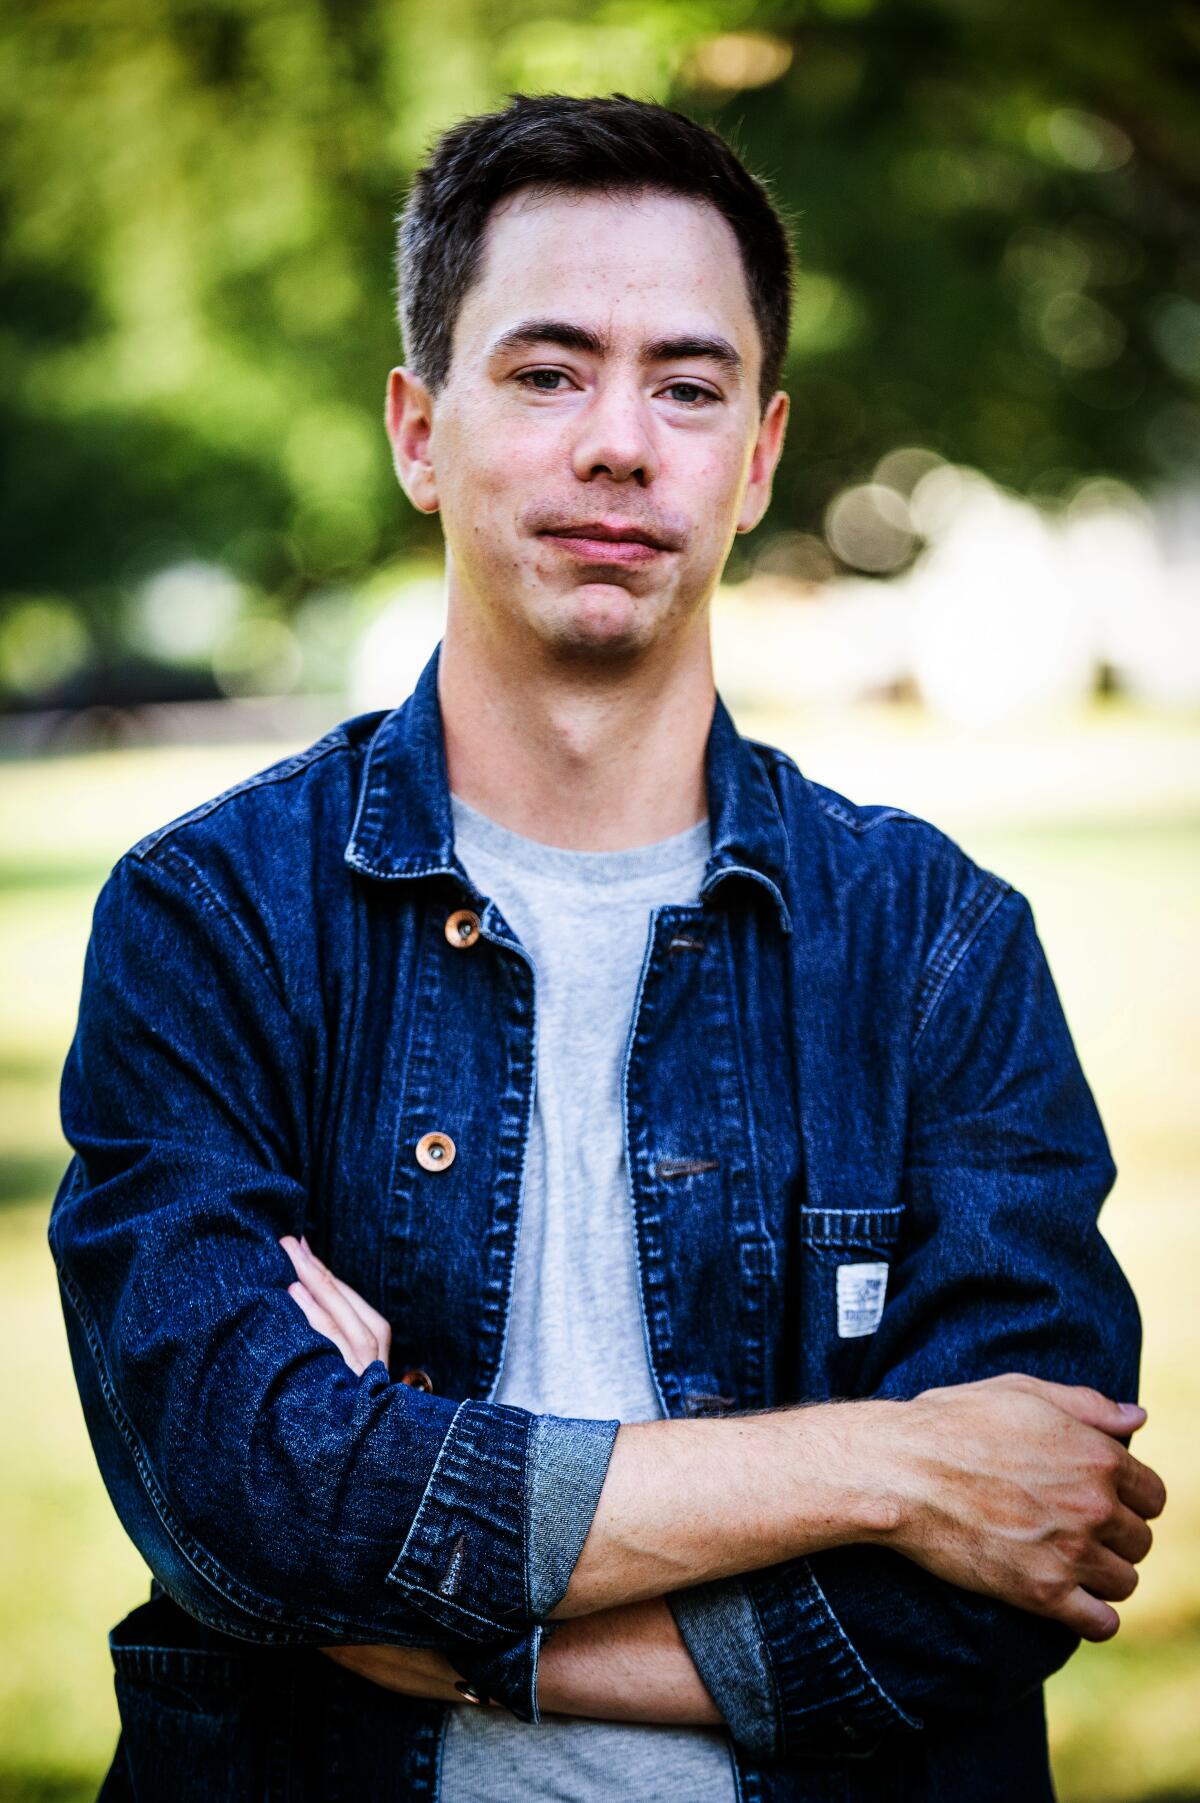 Author Kyle Chayka, in a grey T-shirt and denim jacket, stands with his arms crossed.